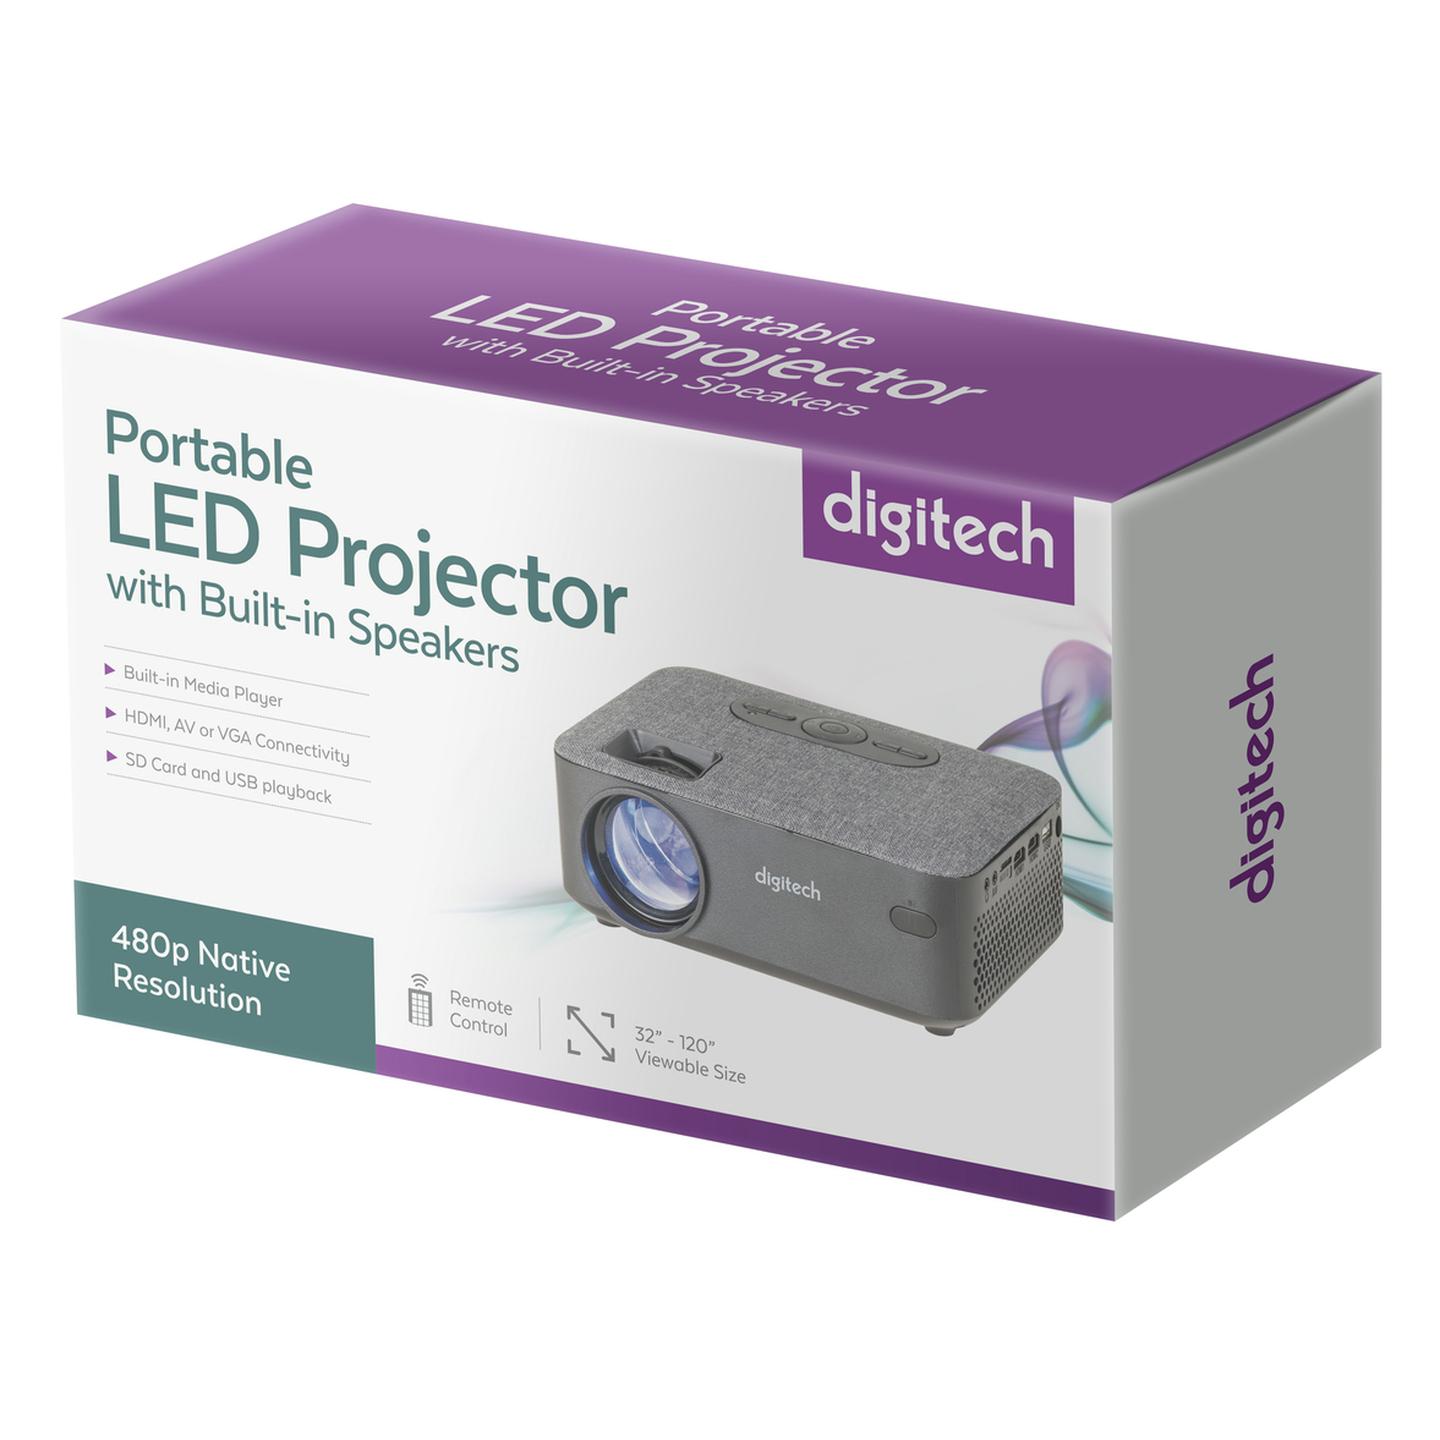 Digitech AV Projector with HDMI x 2 USB and VGA Inputs and Built-in Speakers